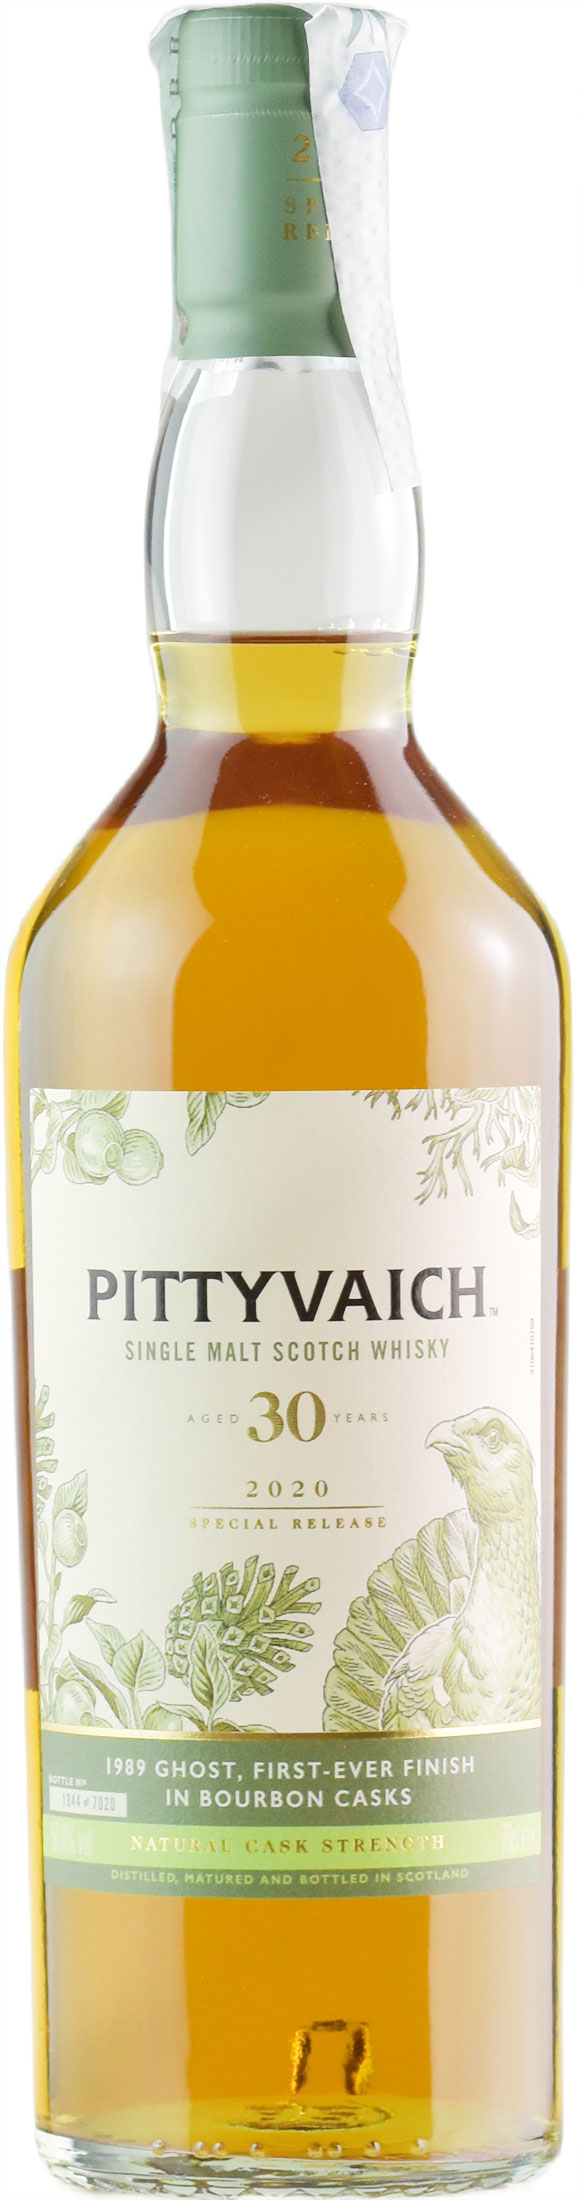 Pittyvaich Single Malt Scotch Whisky Special Release Natural Cask Strenght 30 Anni